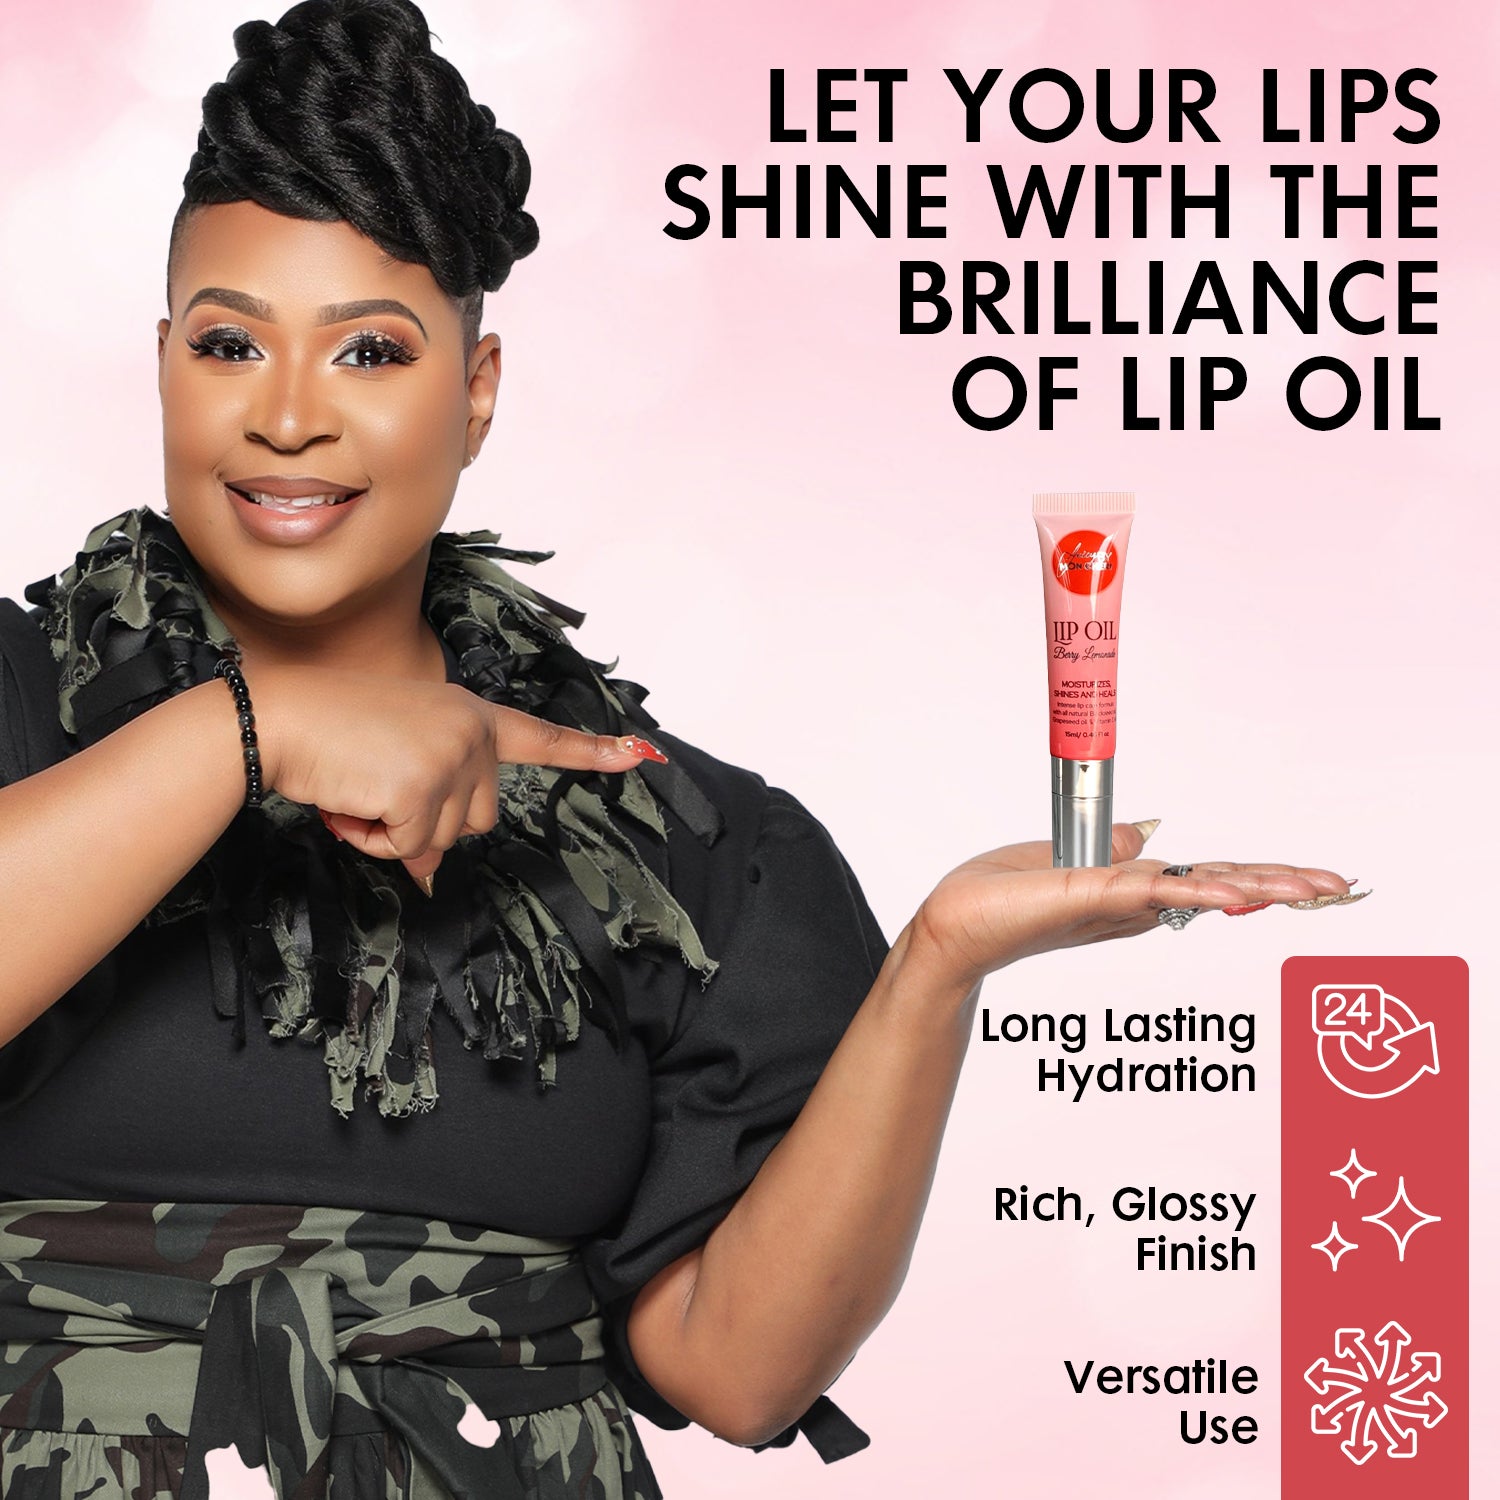 Revitalize Your Lips with Juicy By Mon Cheri Lip Oil - The Ultimate Solution for Moisturized, Shiny, and Healed Lips!